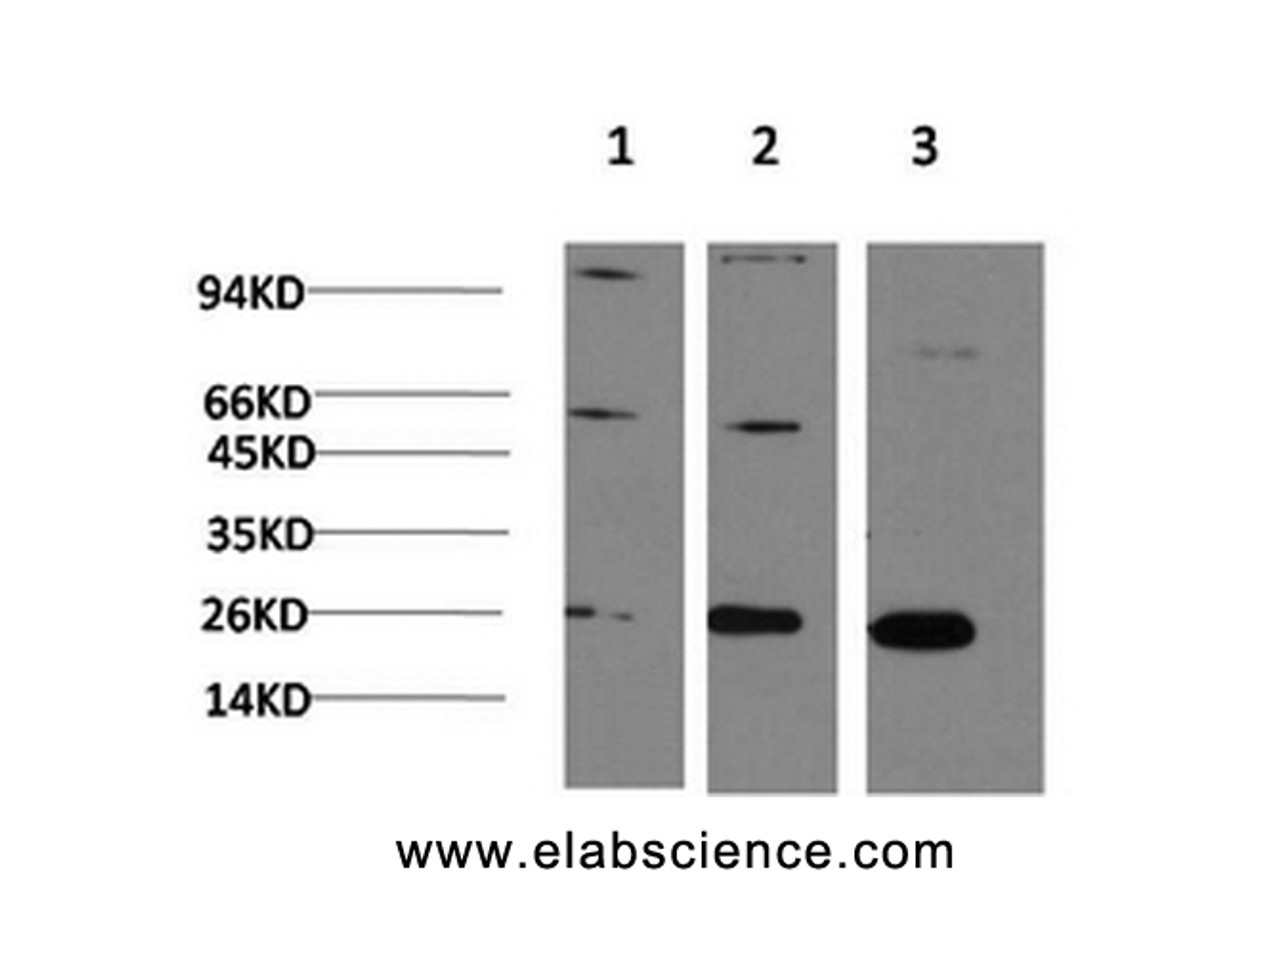 Western Blot analysis of 1) Hela, 2)3T3, 3) PC-12 cells using CBX3 Monoclonal Antibody at dilution of 1:1000.